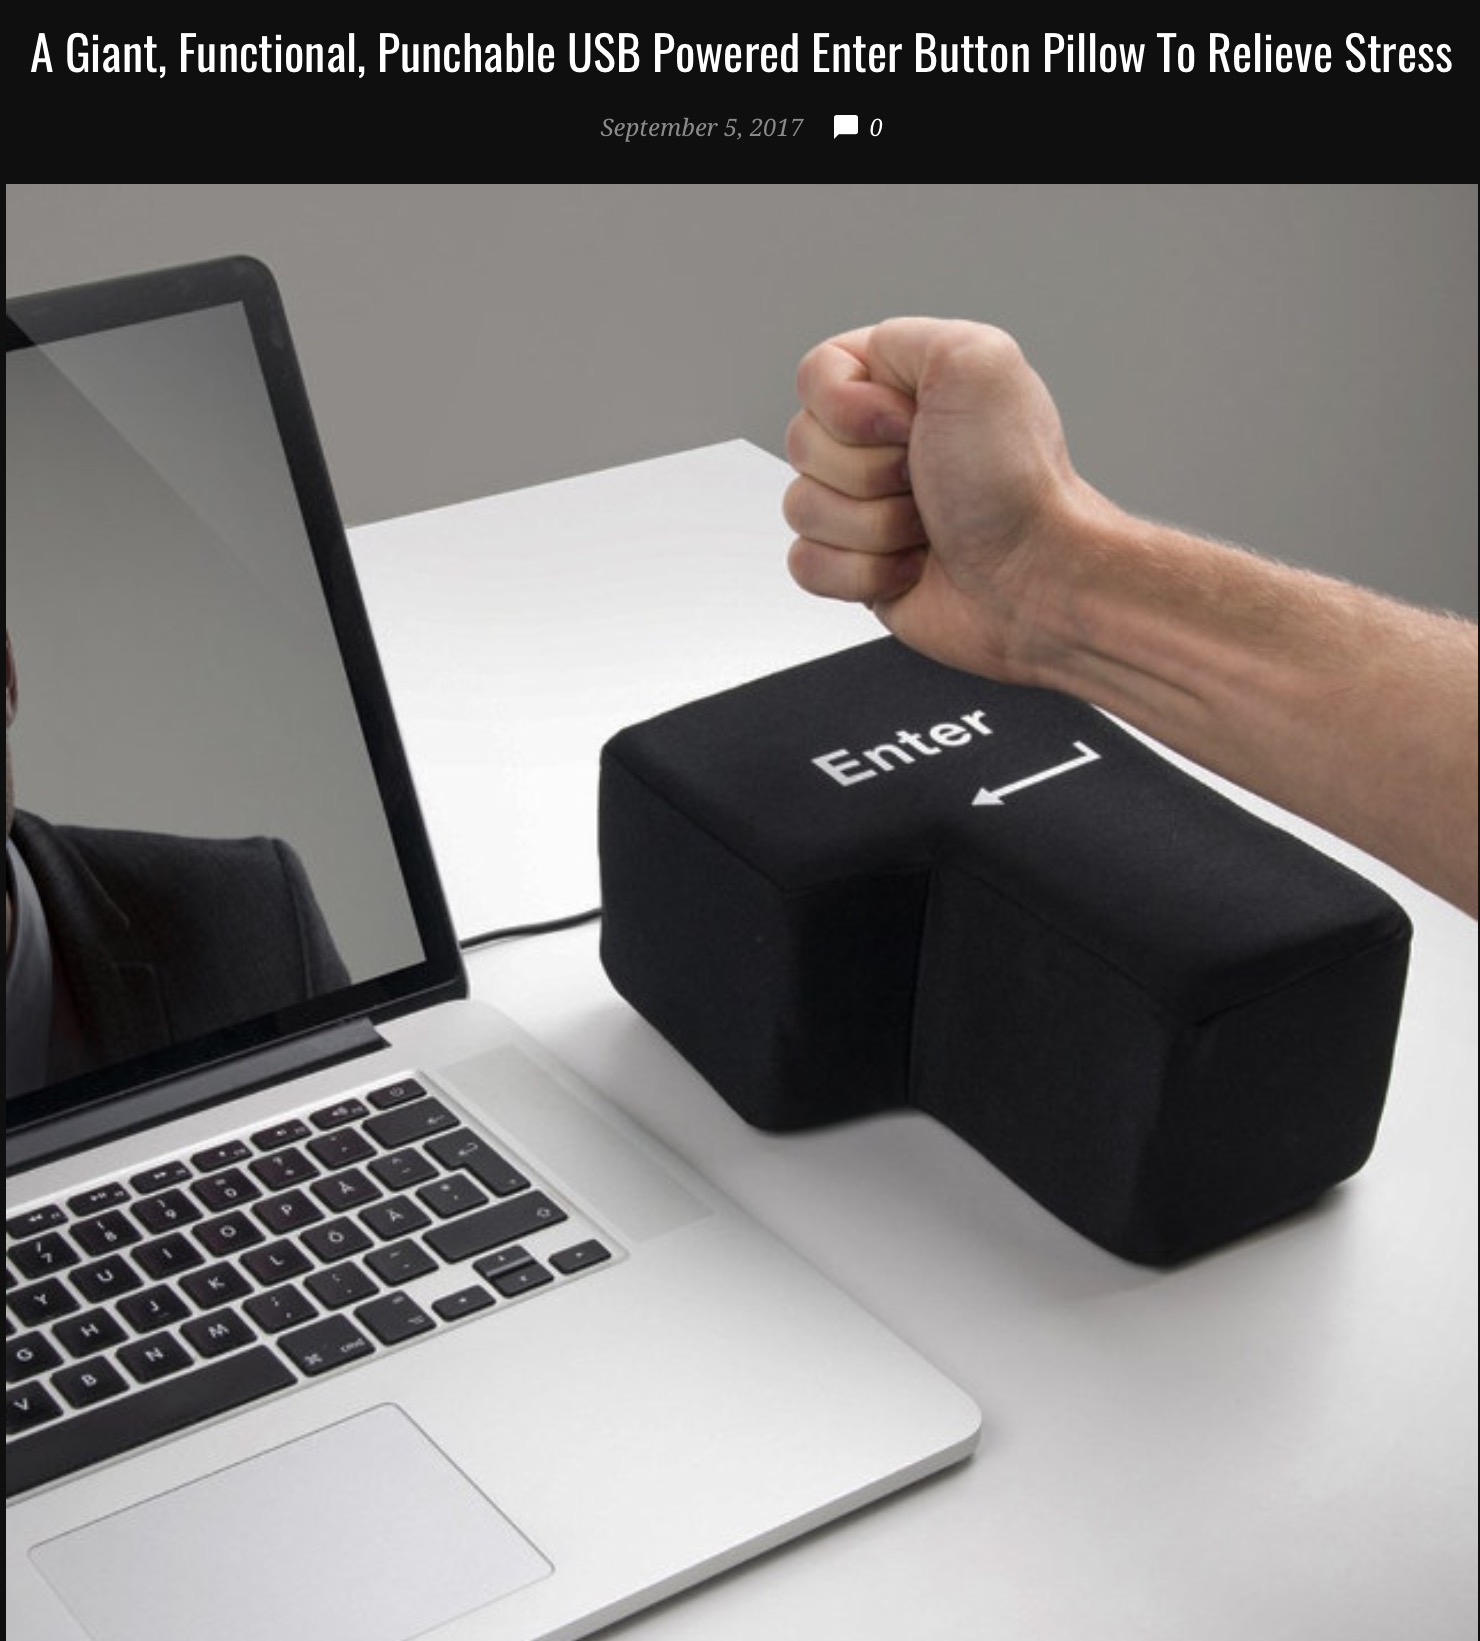 Massive ENTER button stress pillow to punch on your desk.